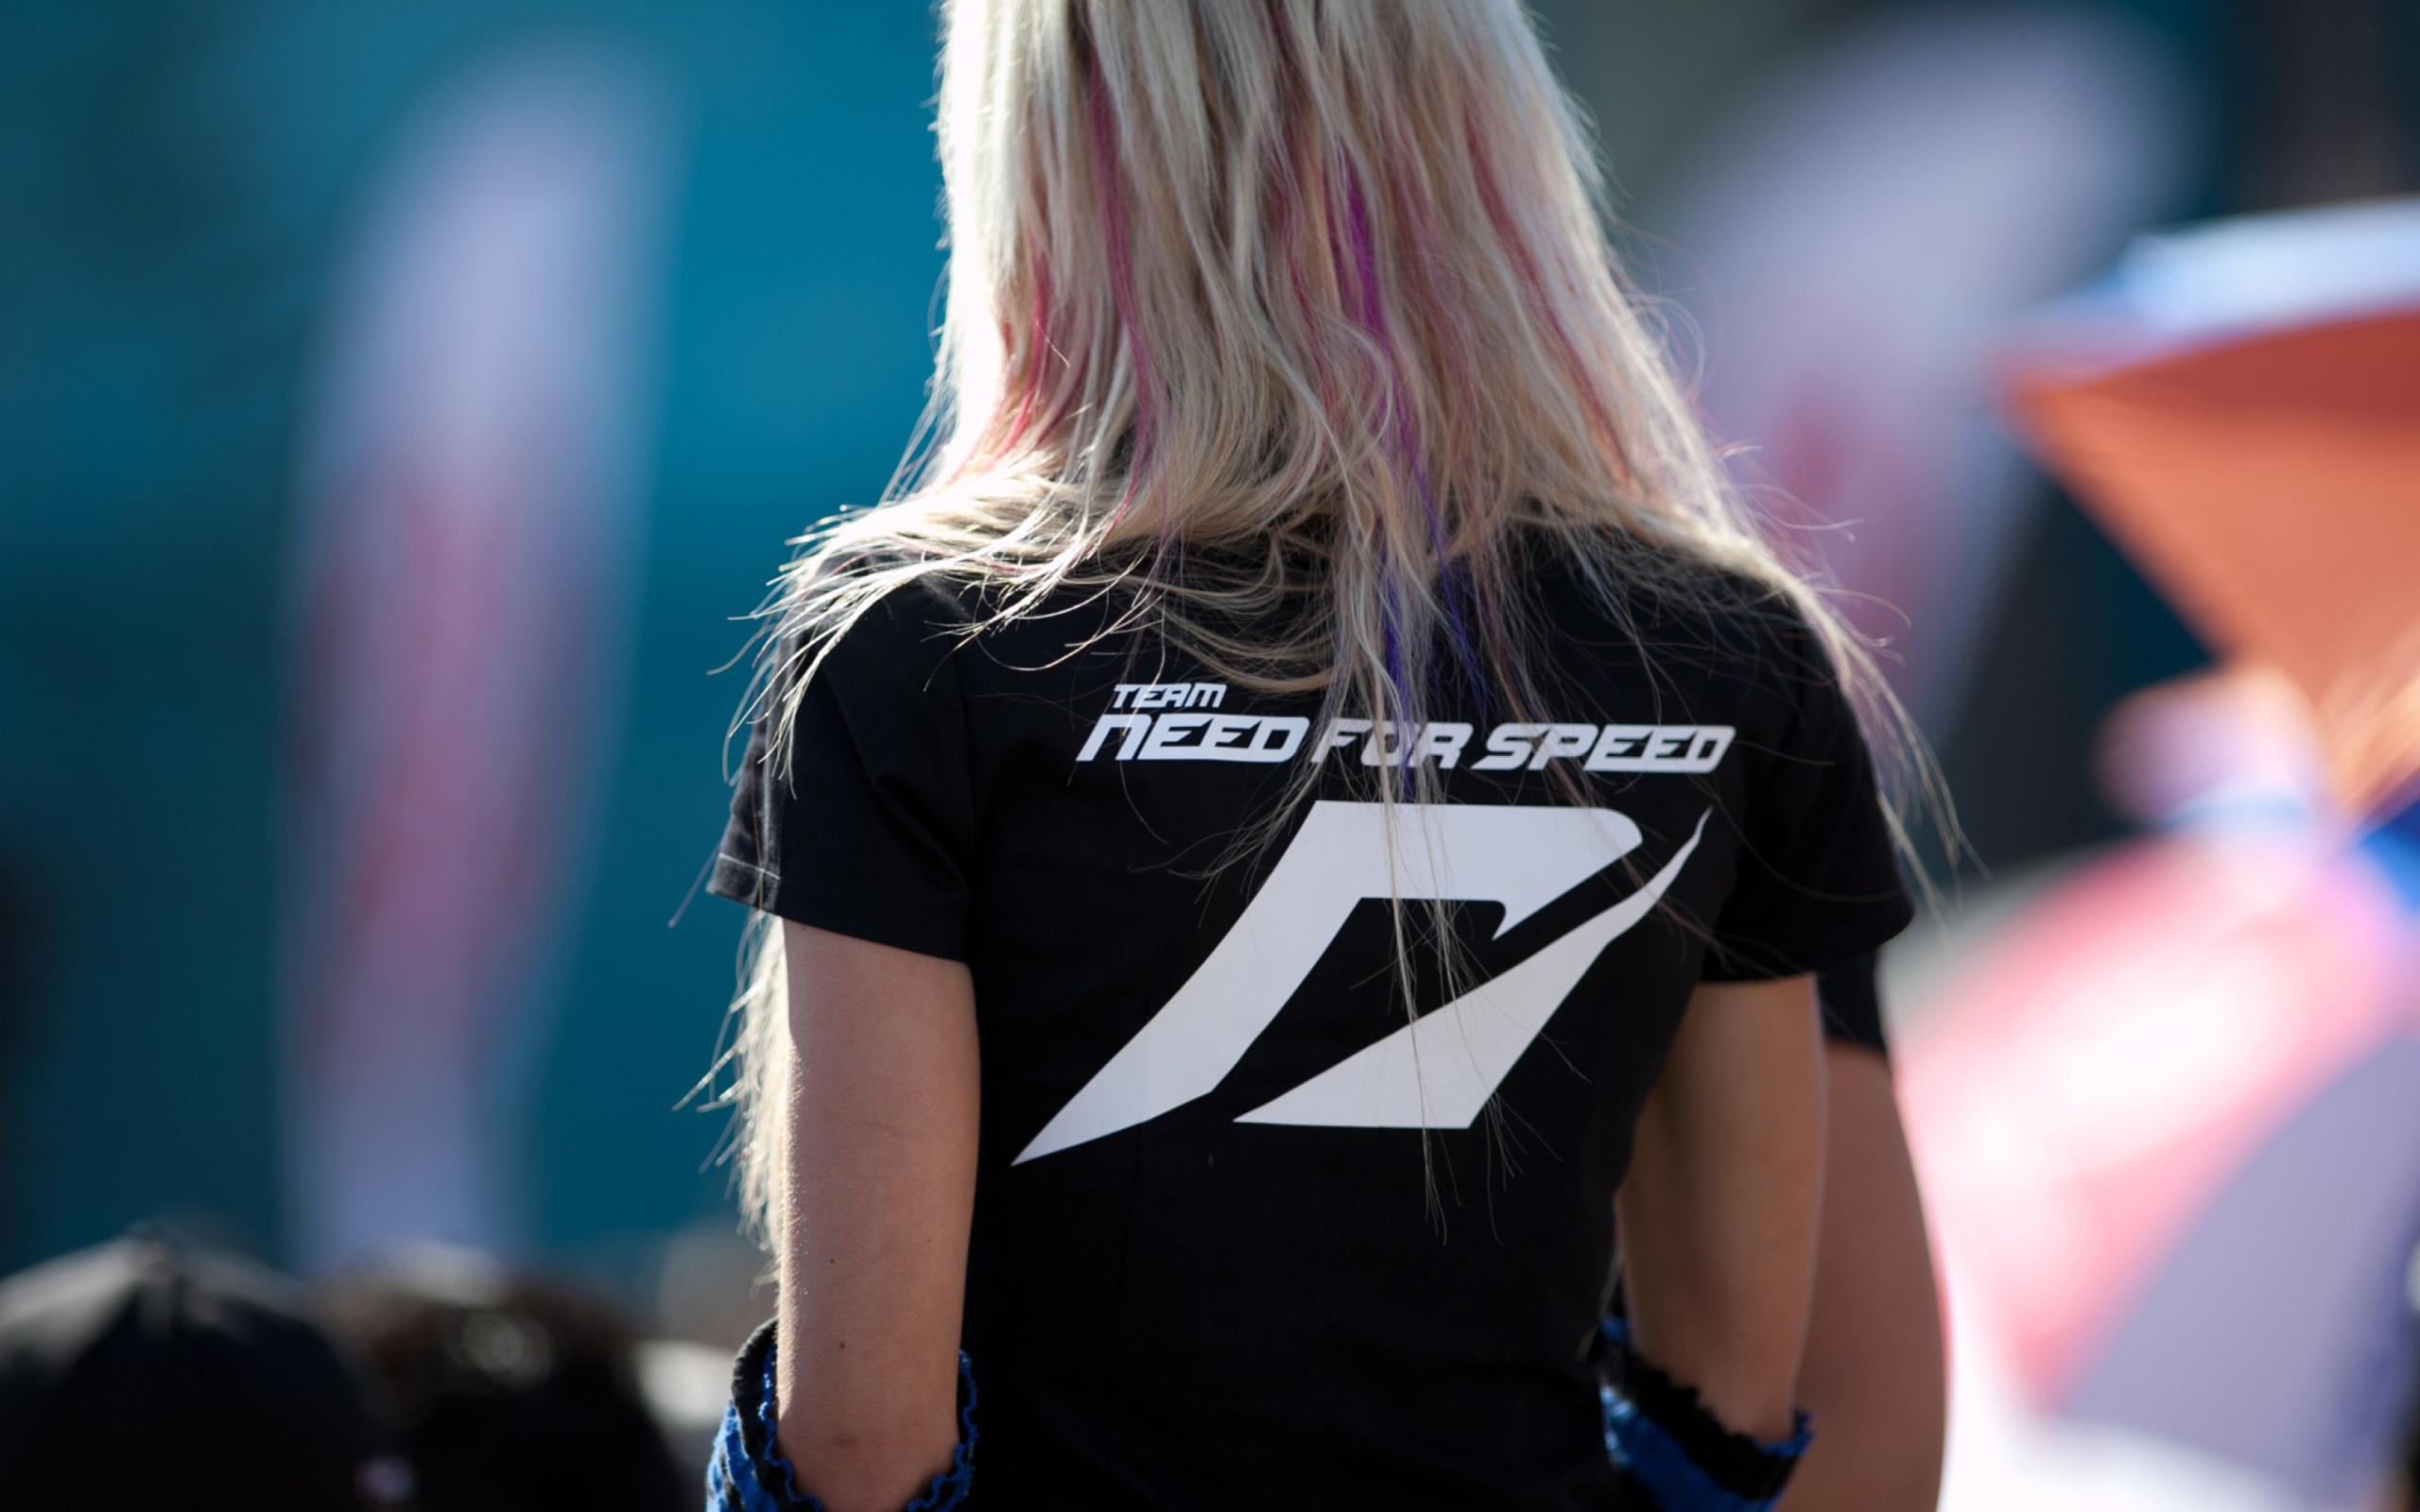 Team Need For Speed wallpaper 2560x1600